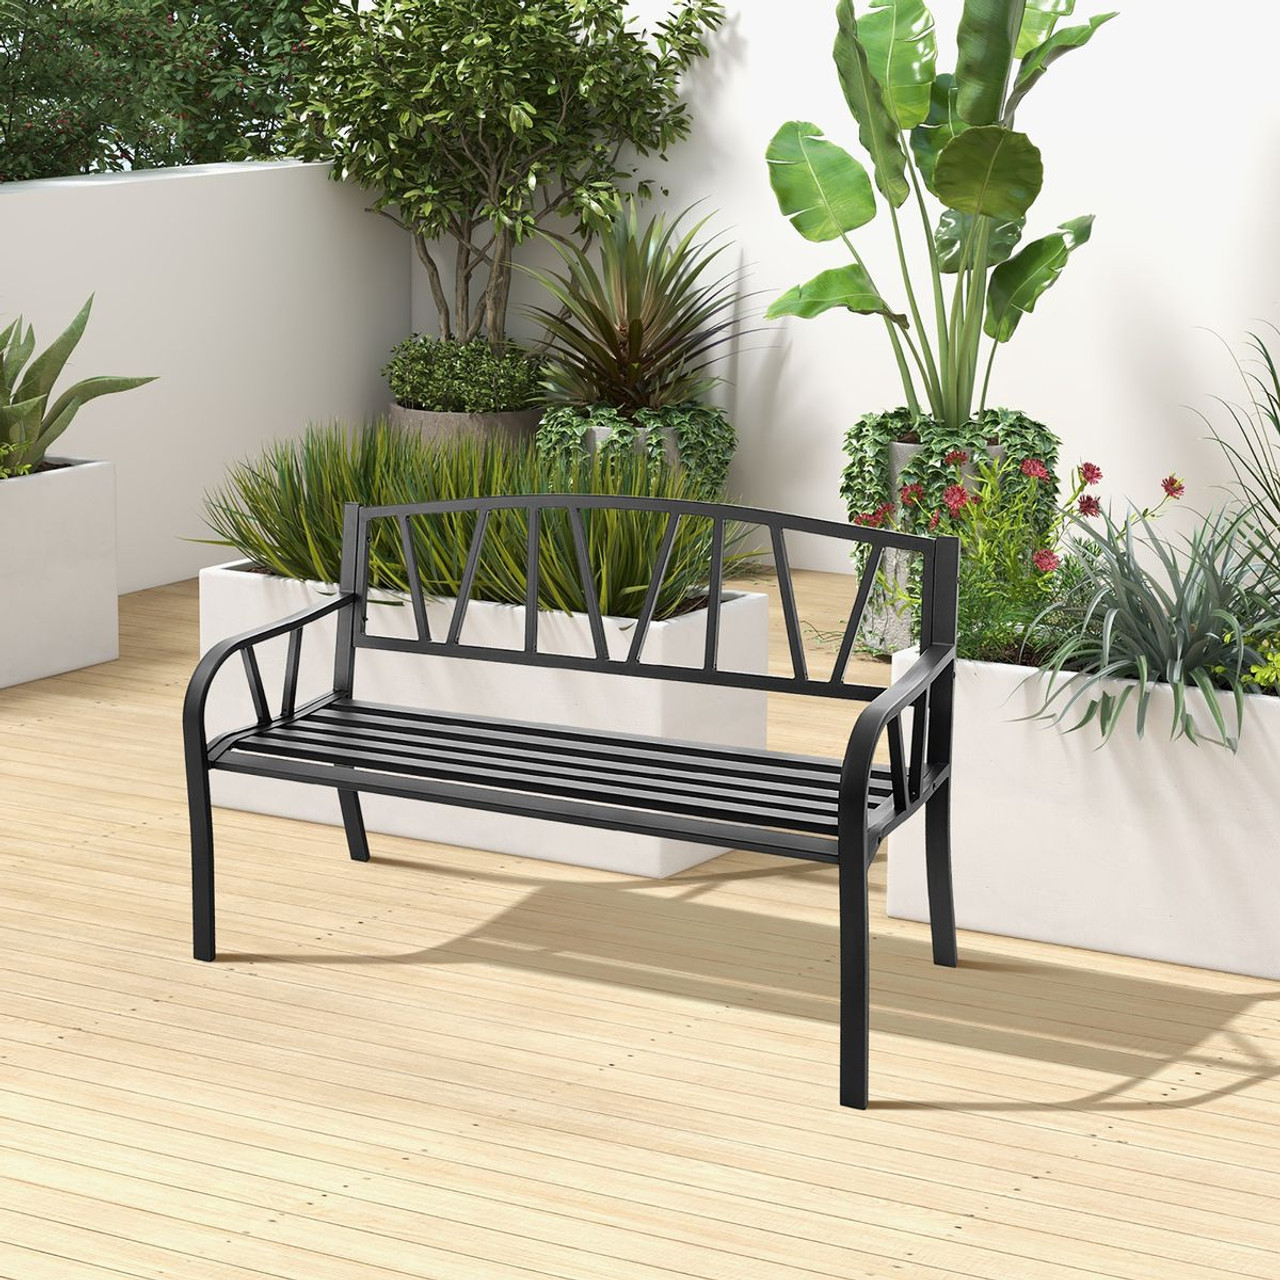 50-Inch Outdoor Patio Garden Bench Metal Frame with Ergonomic Armrest product image